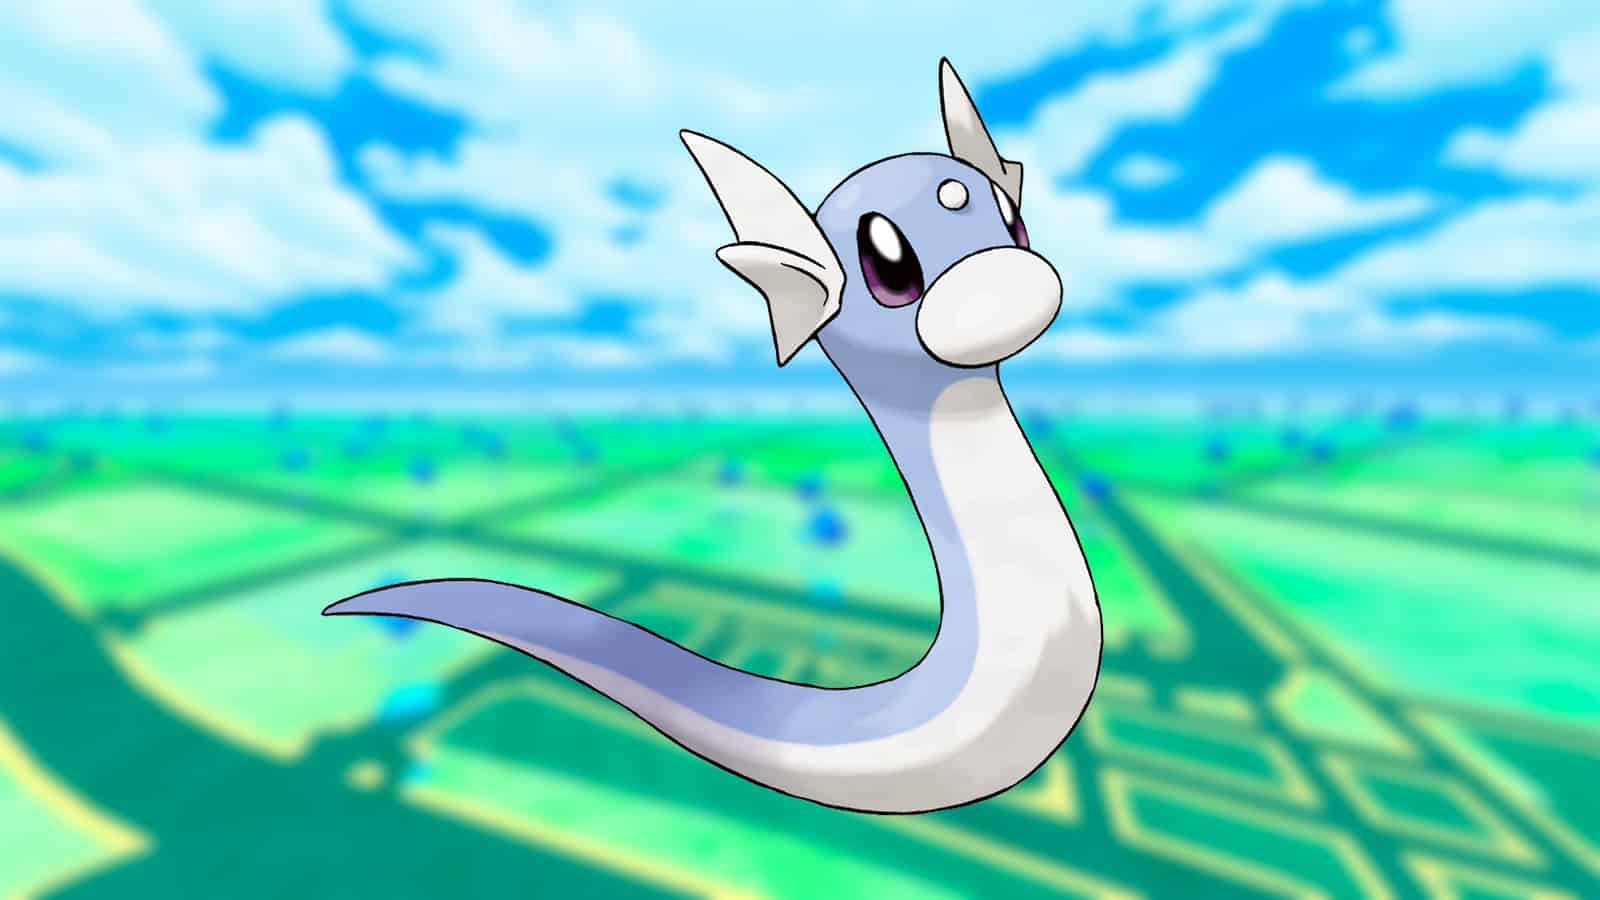 Dratini appearing in the Pokemon Go Little Cup Remix best team